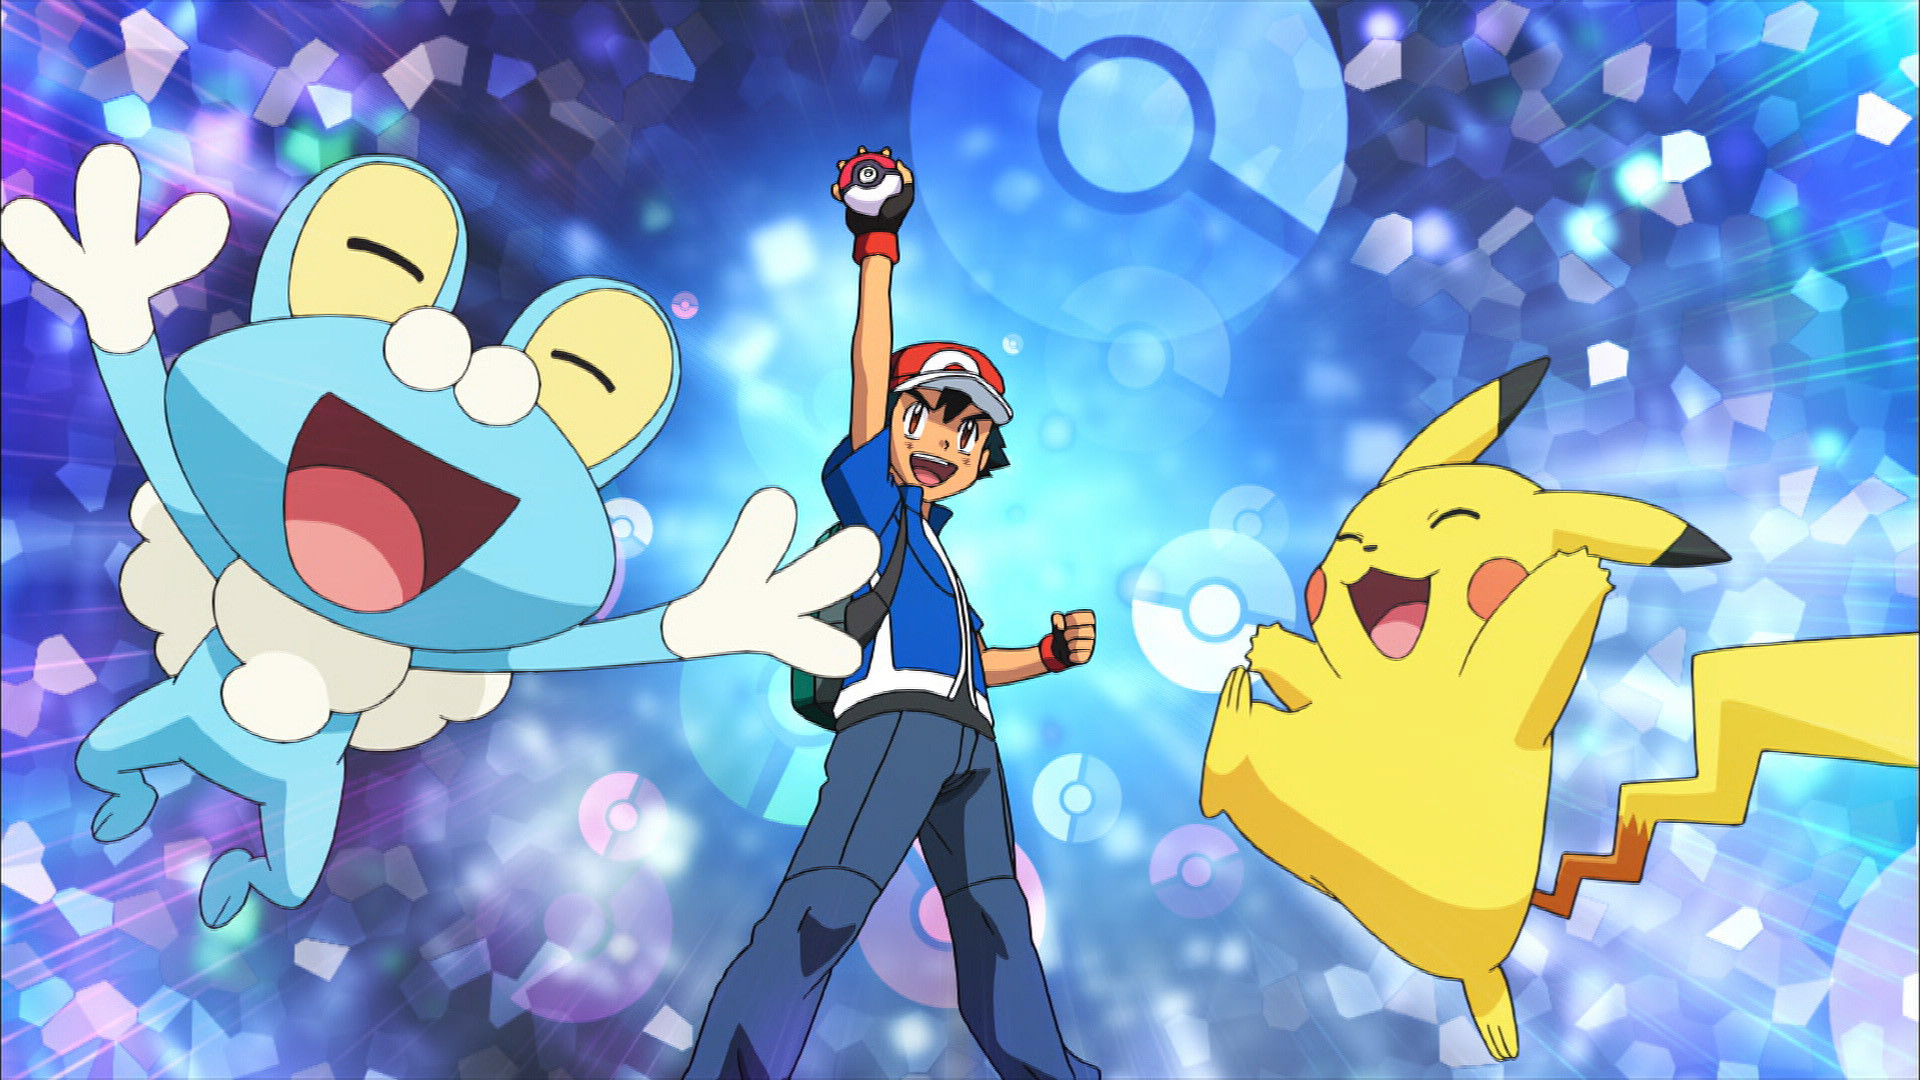 Pokemon HD Wallpaper Wide ready to download just for FREE from our  beautiful Pokemon HD Wallpapers